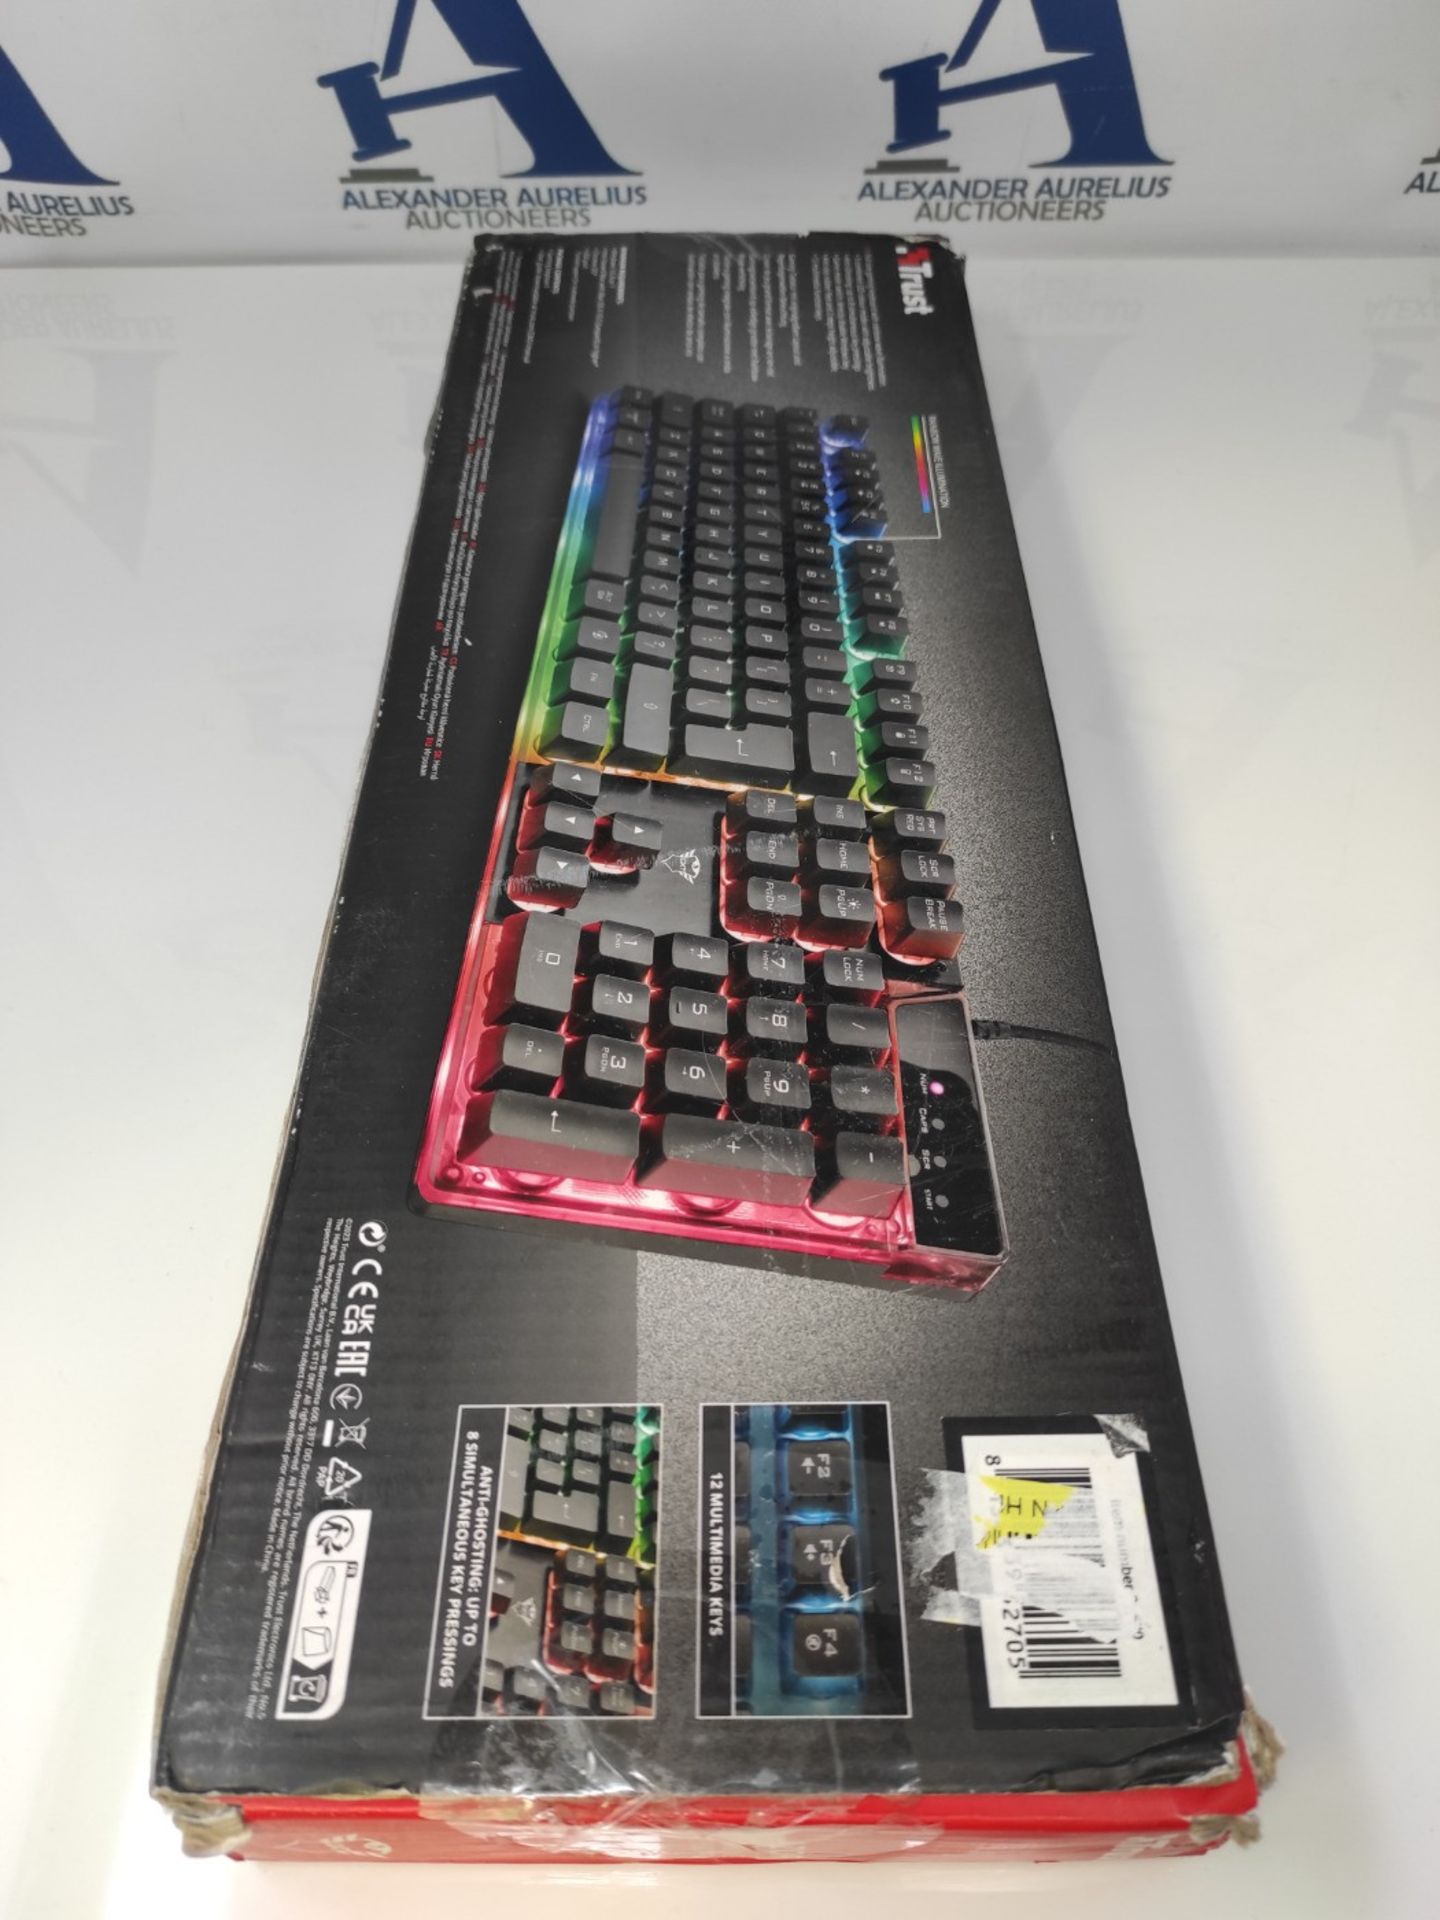 Trust Gaming GXT 835 Azor Wired Gamer Keyboard French AZERTY, Rainbow LED Lighting, Ga - Image 2 of 3